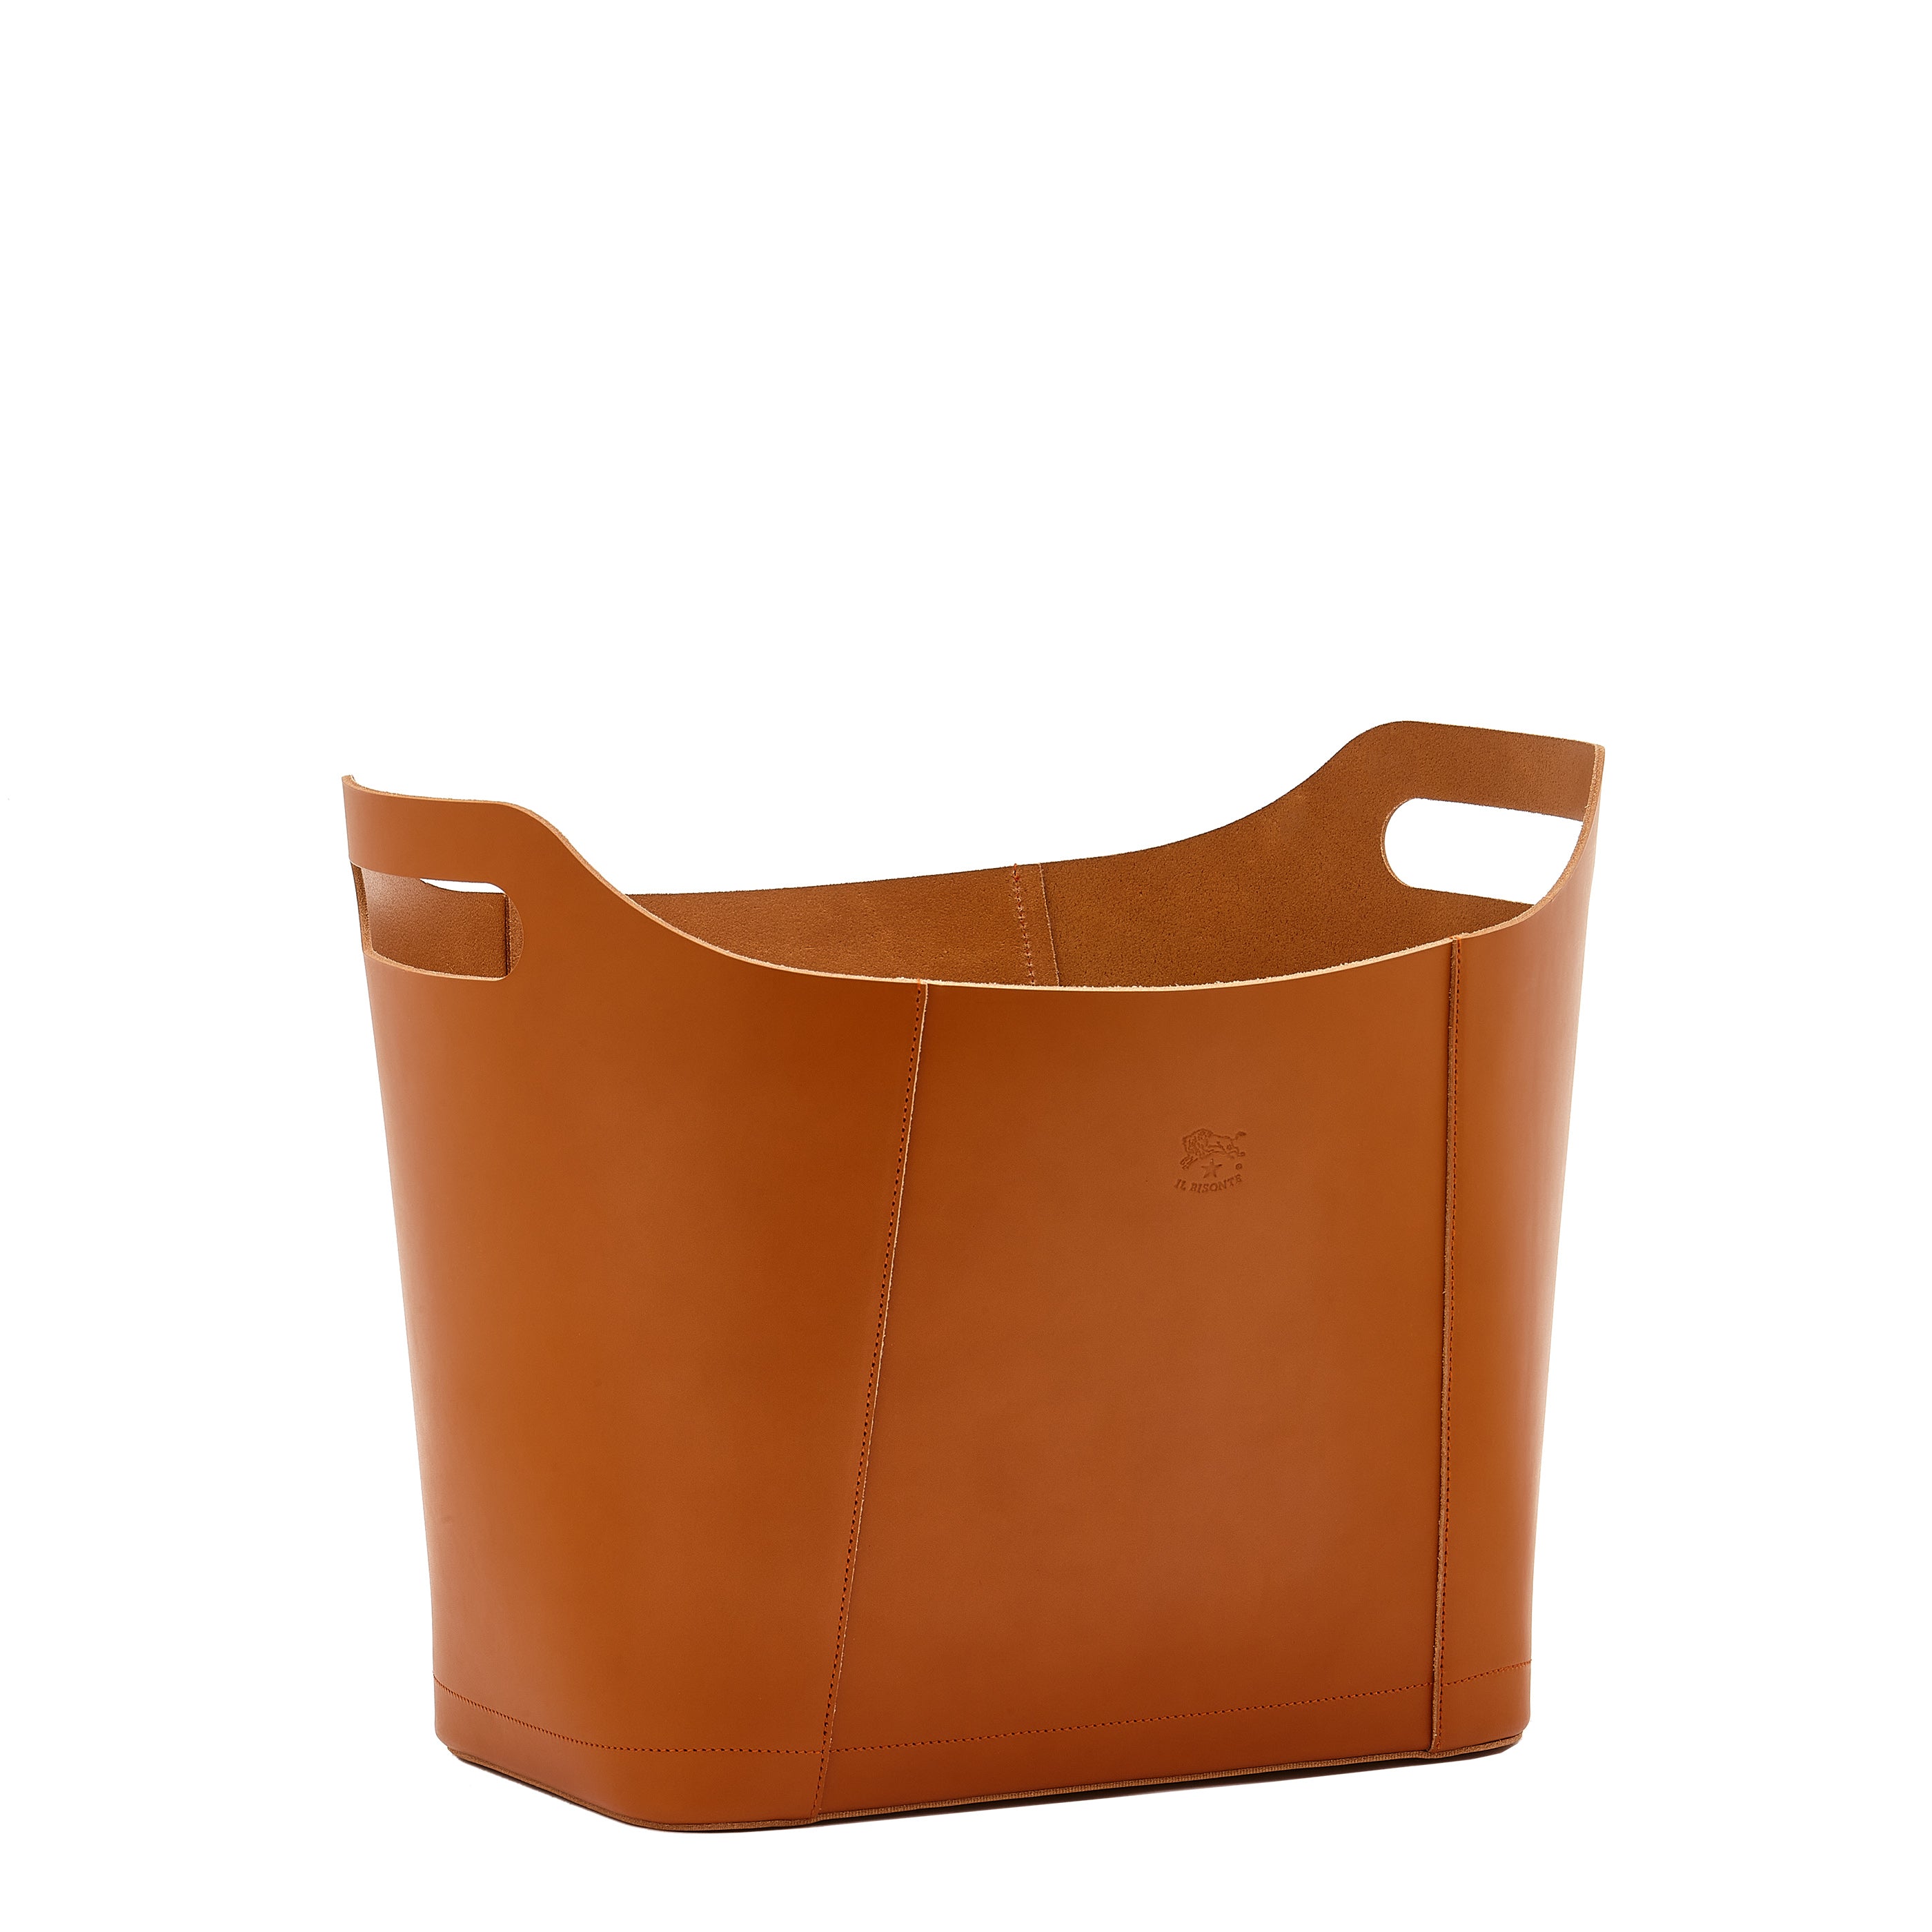 Home | Container in leather color caramel